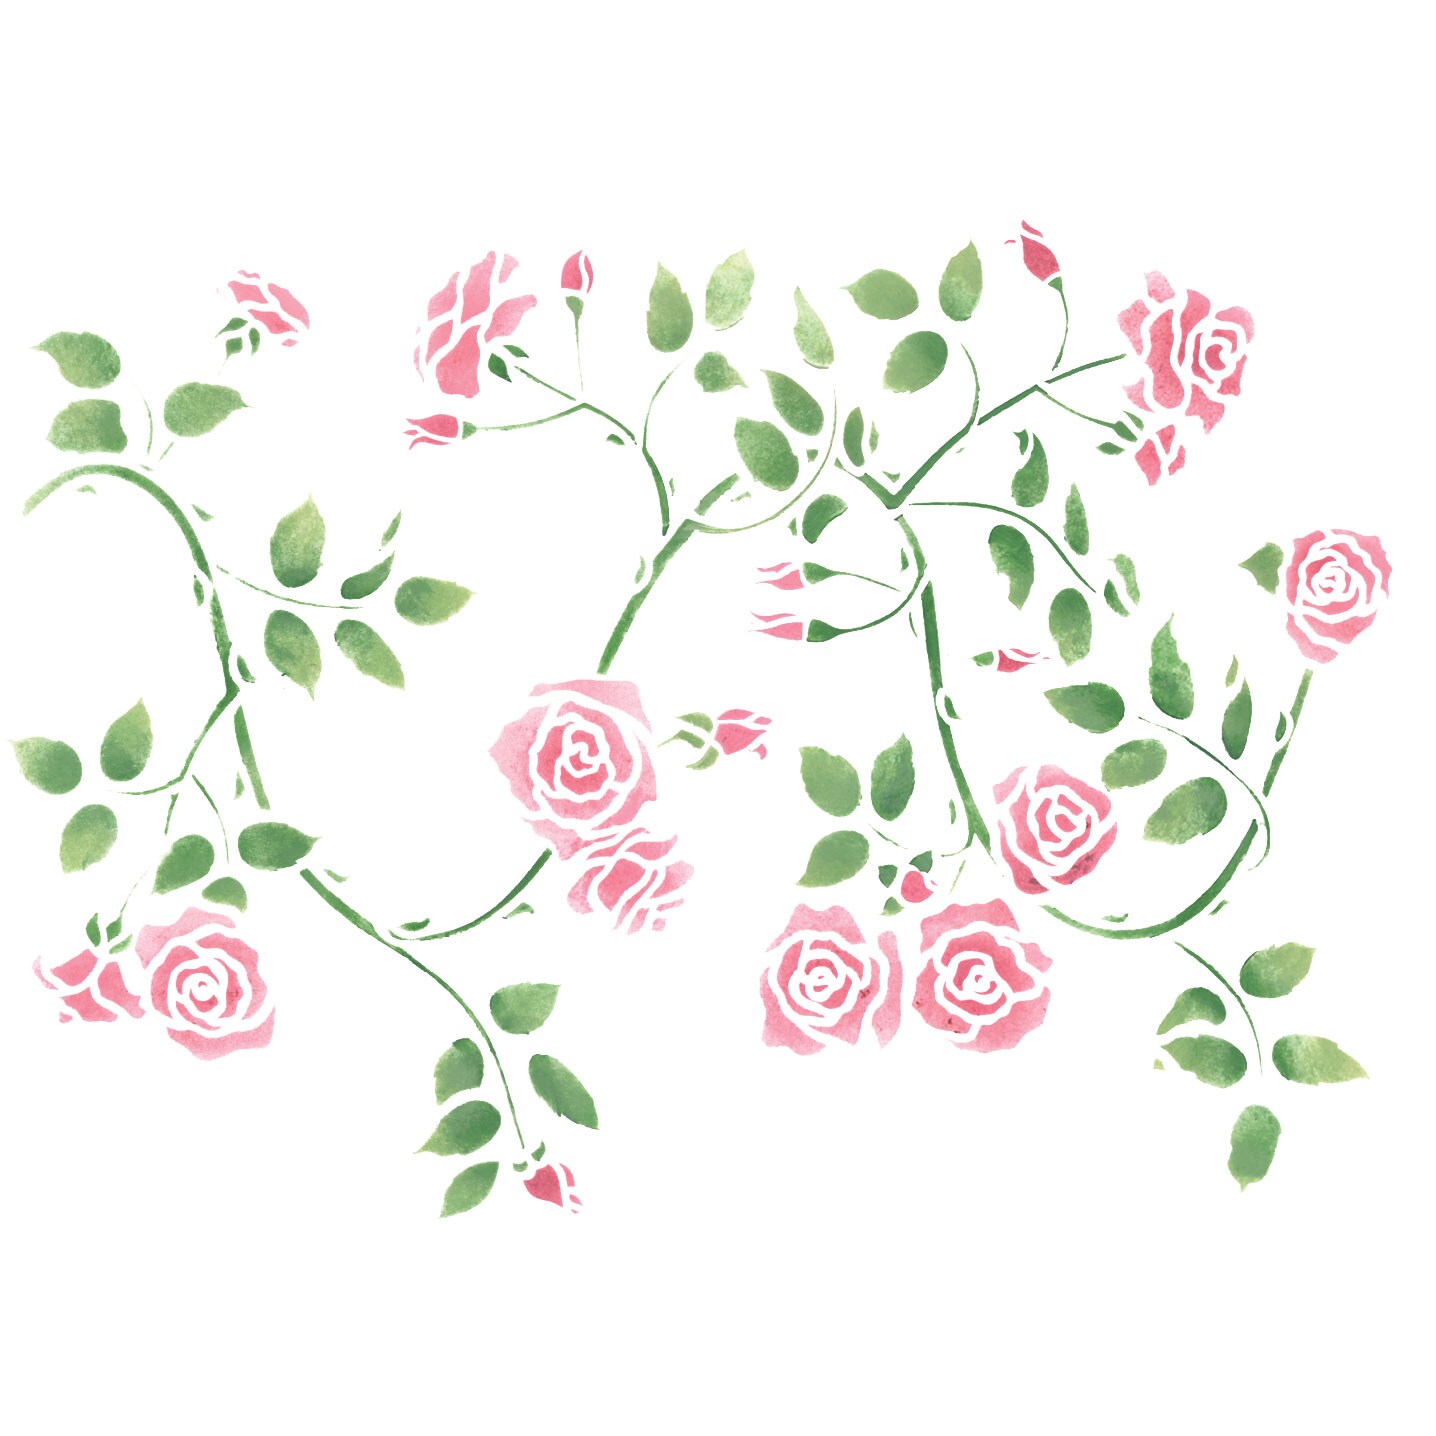 Twisting Rose Wall Stencil Border | 1002 by Designer Stencils | Floral Stencils | Reusable Art Craft Stencils for Painting on Walls, Canvas, Wood | Reusable Plastic Paint Stencil for Home Makeover | Easy to Use &#x26; Clean Art Stencil